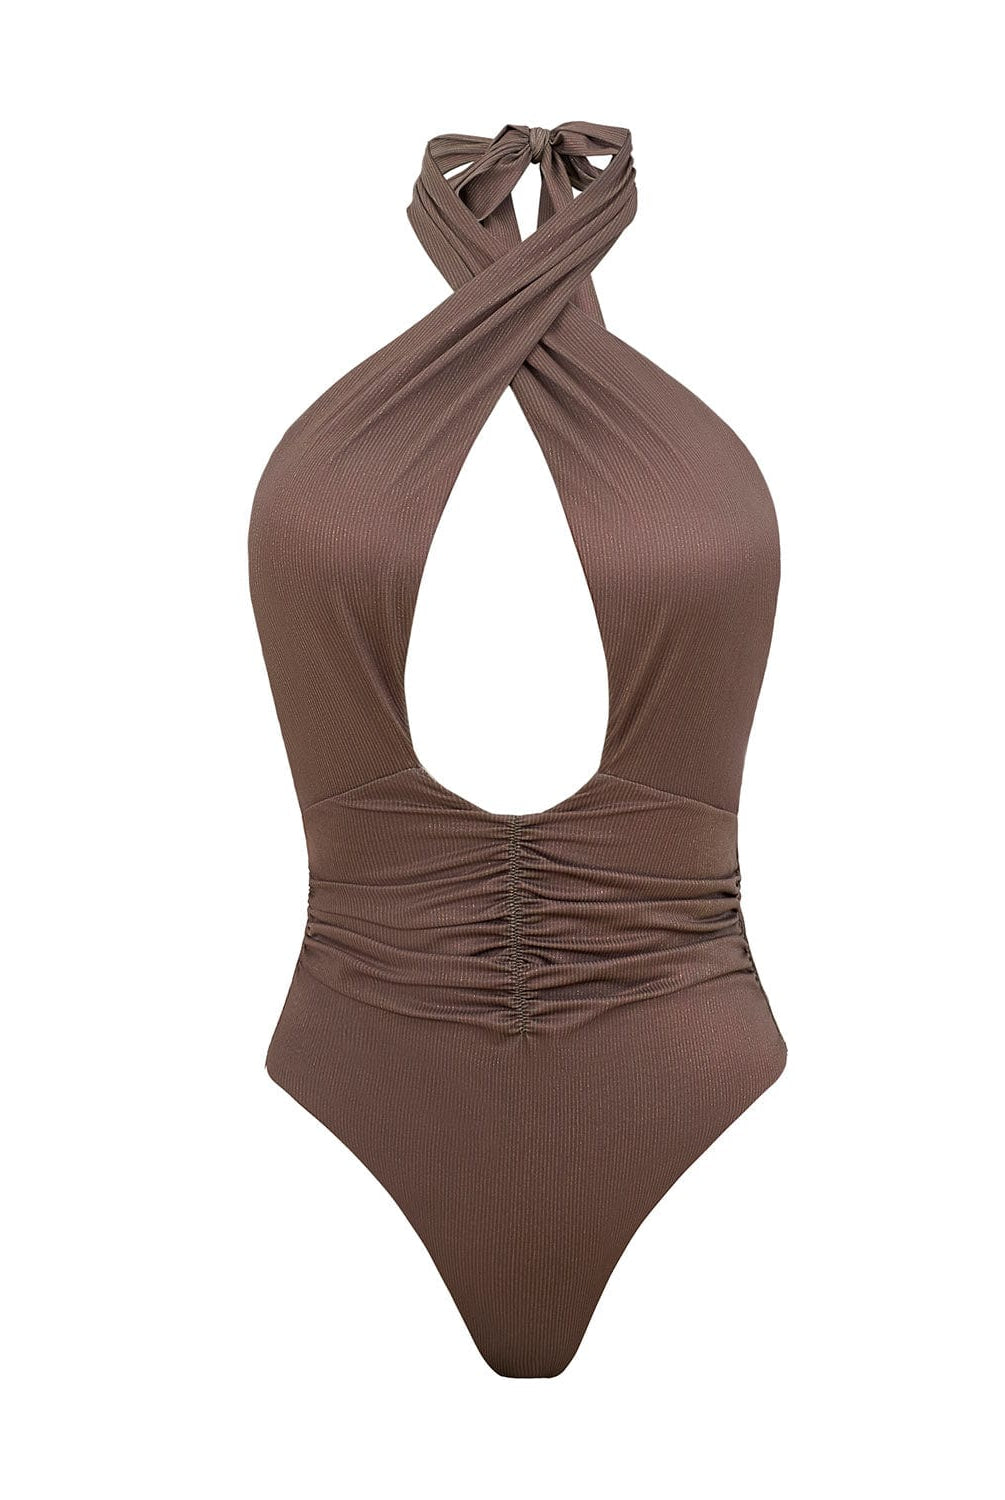 A brown one piece bathing suit against a white wall. 